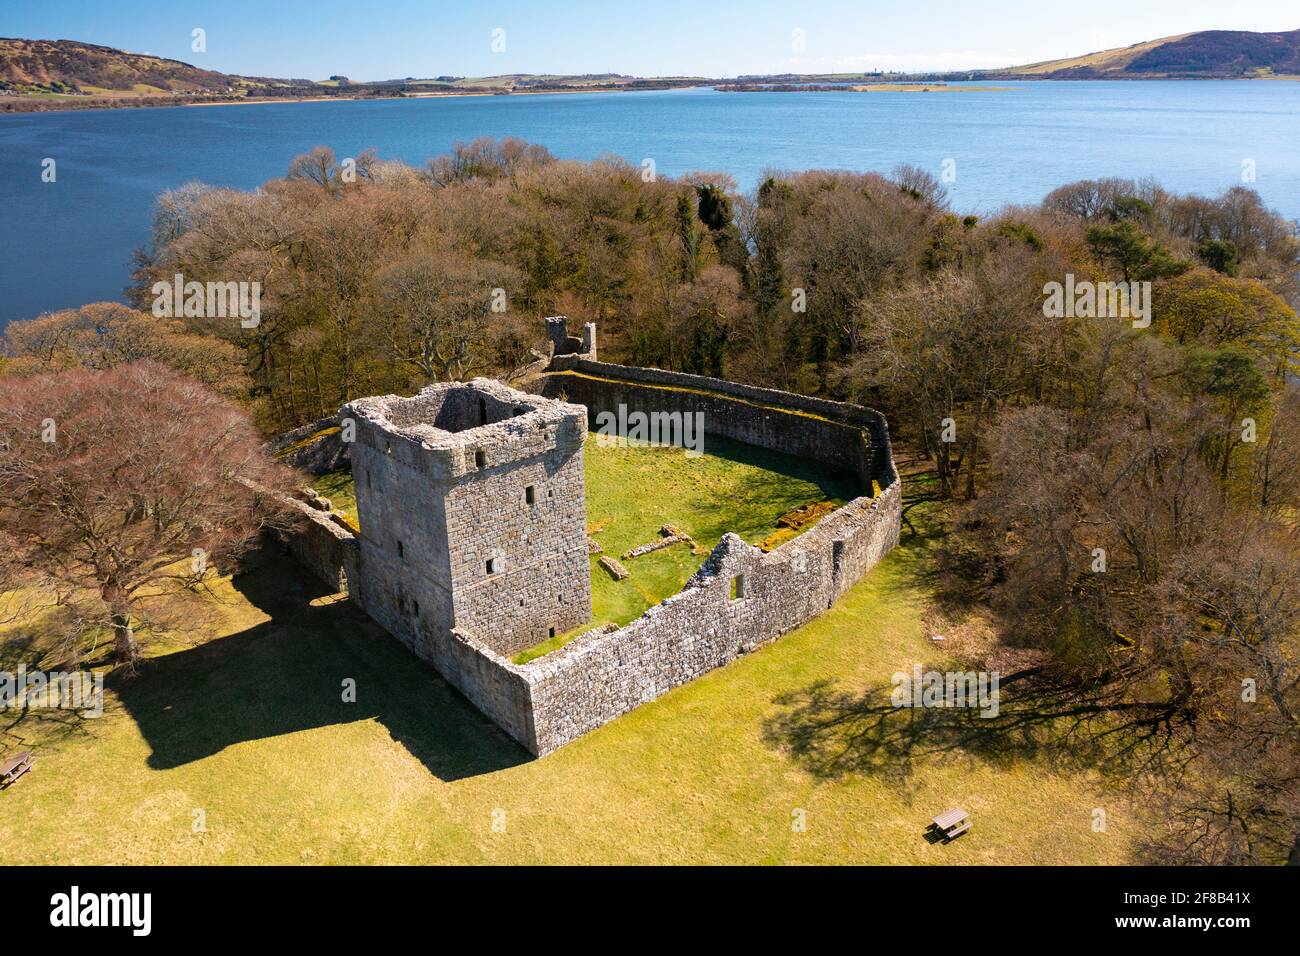 Aerial view from drone of Lochleven Castle ( closed during covid-19 lockdown) on island on Loch Leven, Perth and Kinross, Scotland, UK Stock Photo